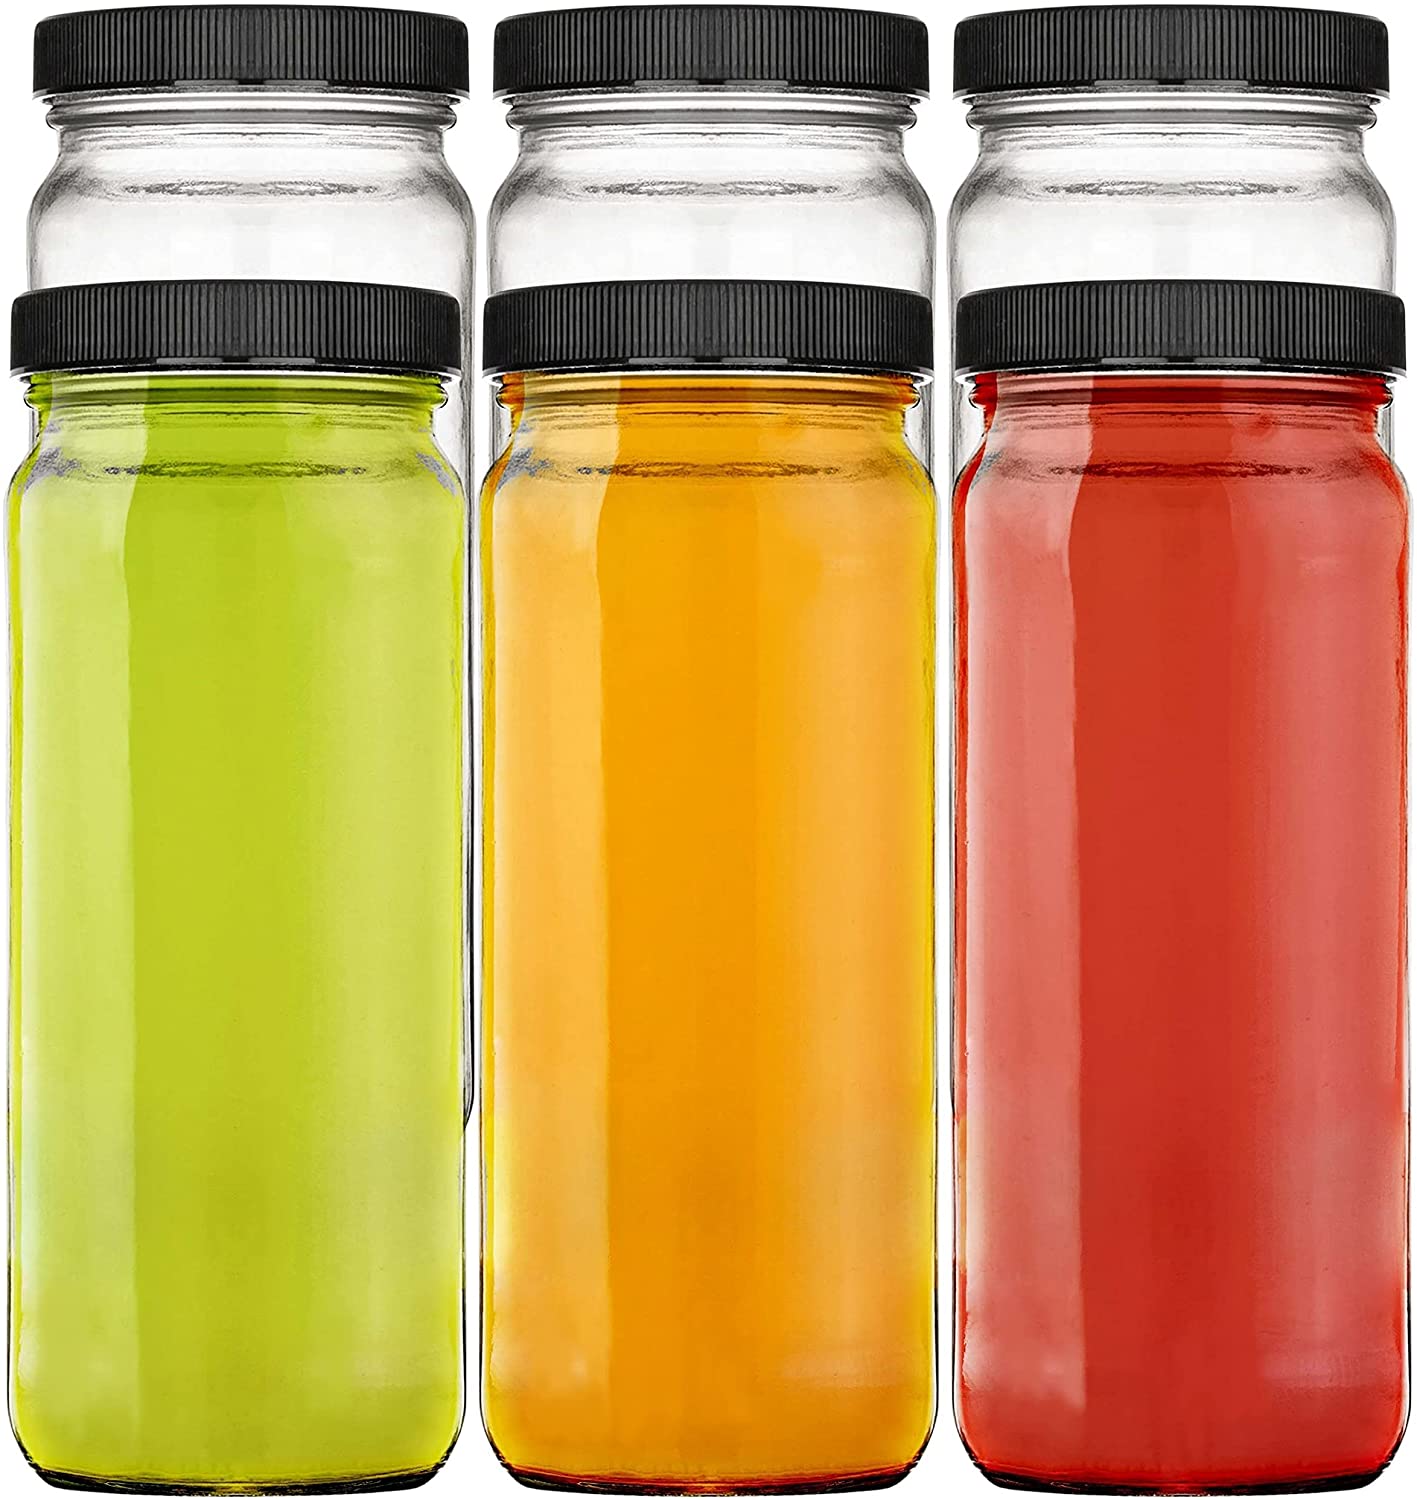 16 oz Glass Jars with Plastic Caps (6 Pack) - Reusable Food Grade